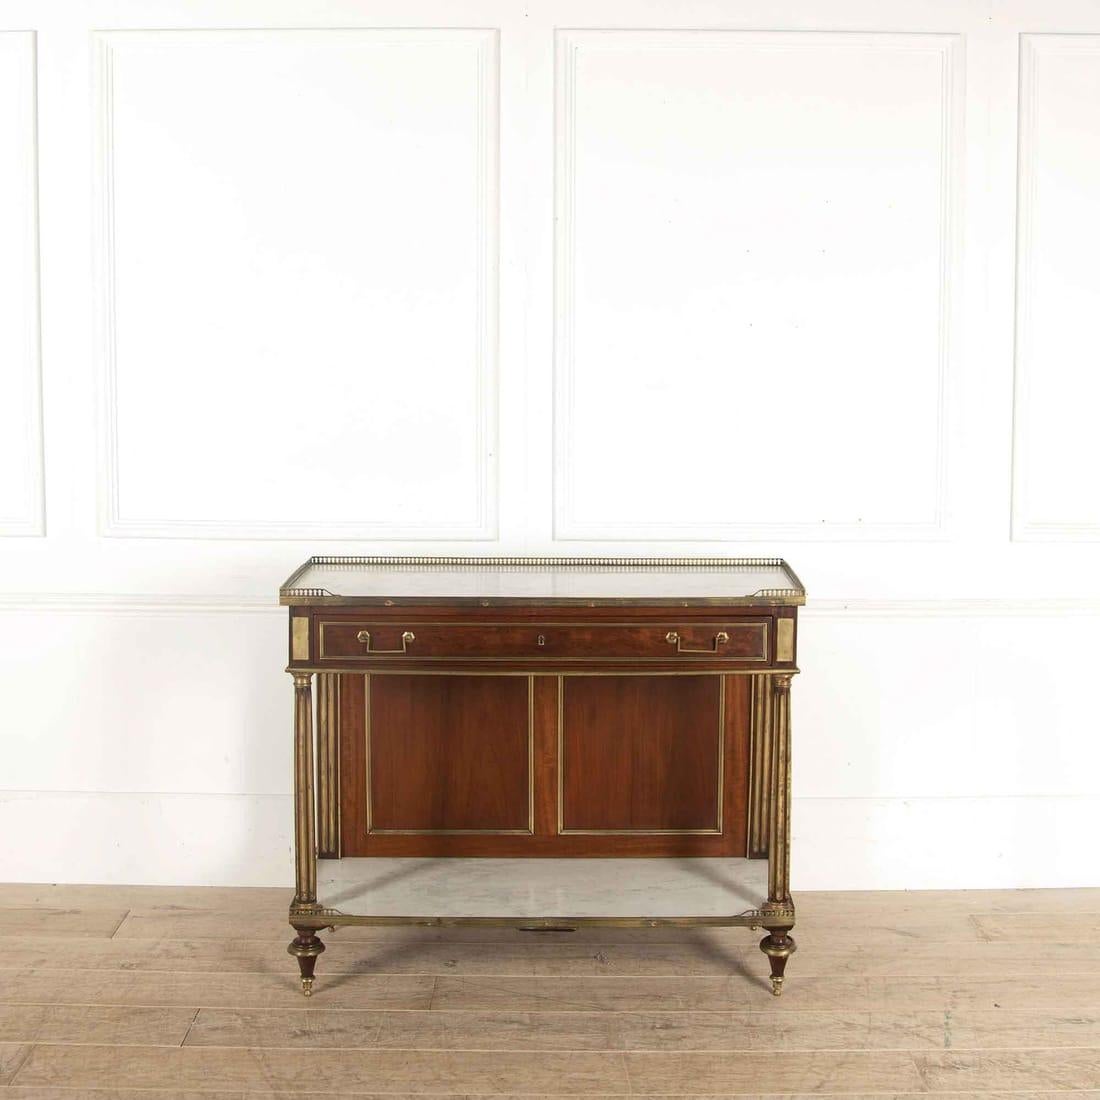 A handsome 19th century French console or serving table in mahogany with inset marble surfaces and brass detailing.